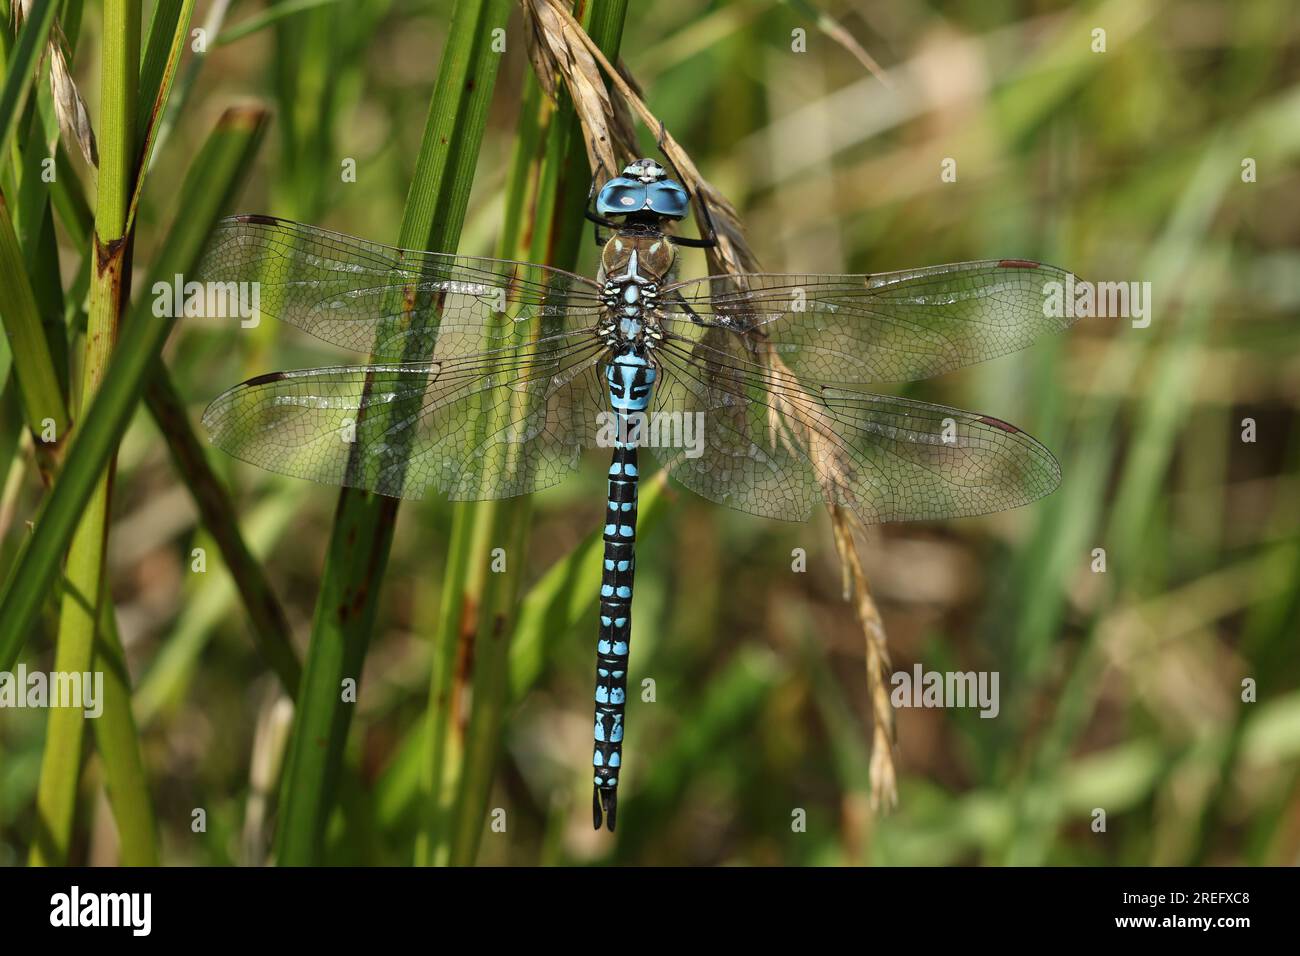 A rare male Southern Migrant Hawker Dragonfly, Aeshna affinis, perching on grass seeds in the UK. Stock Photo